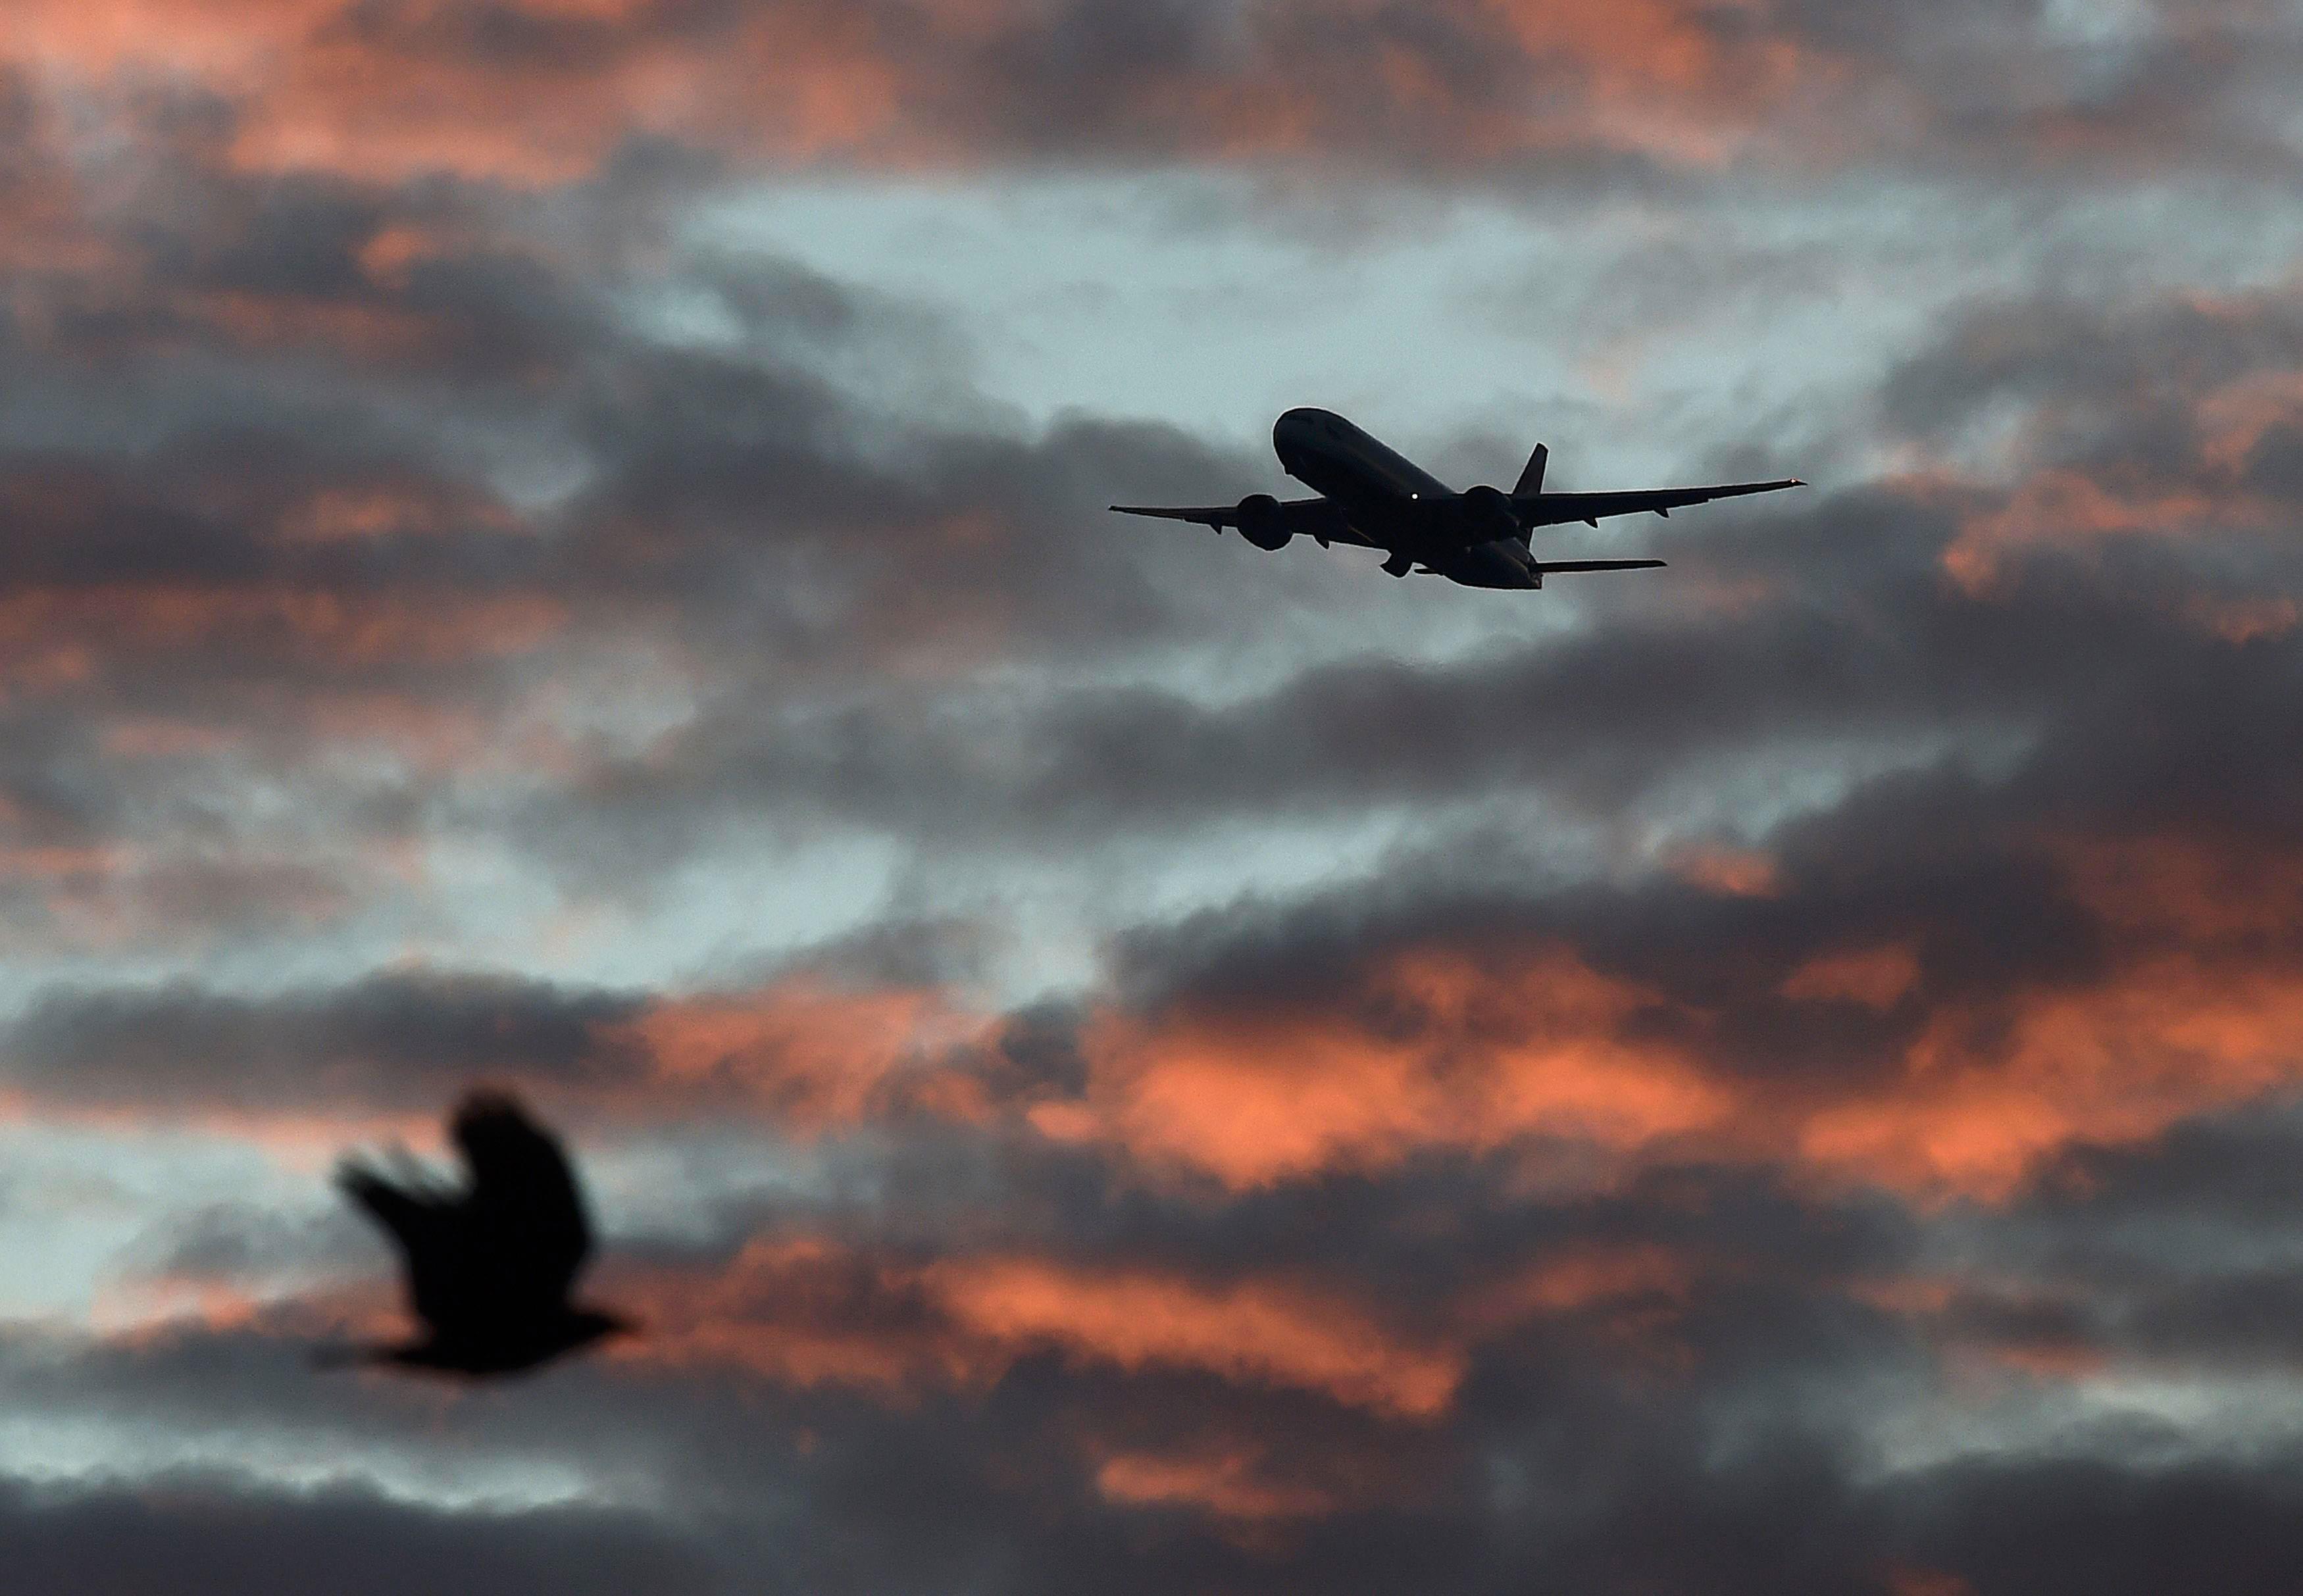 A bird passes in the foreground as a passenger aircraft makes it's final landing approach towards He